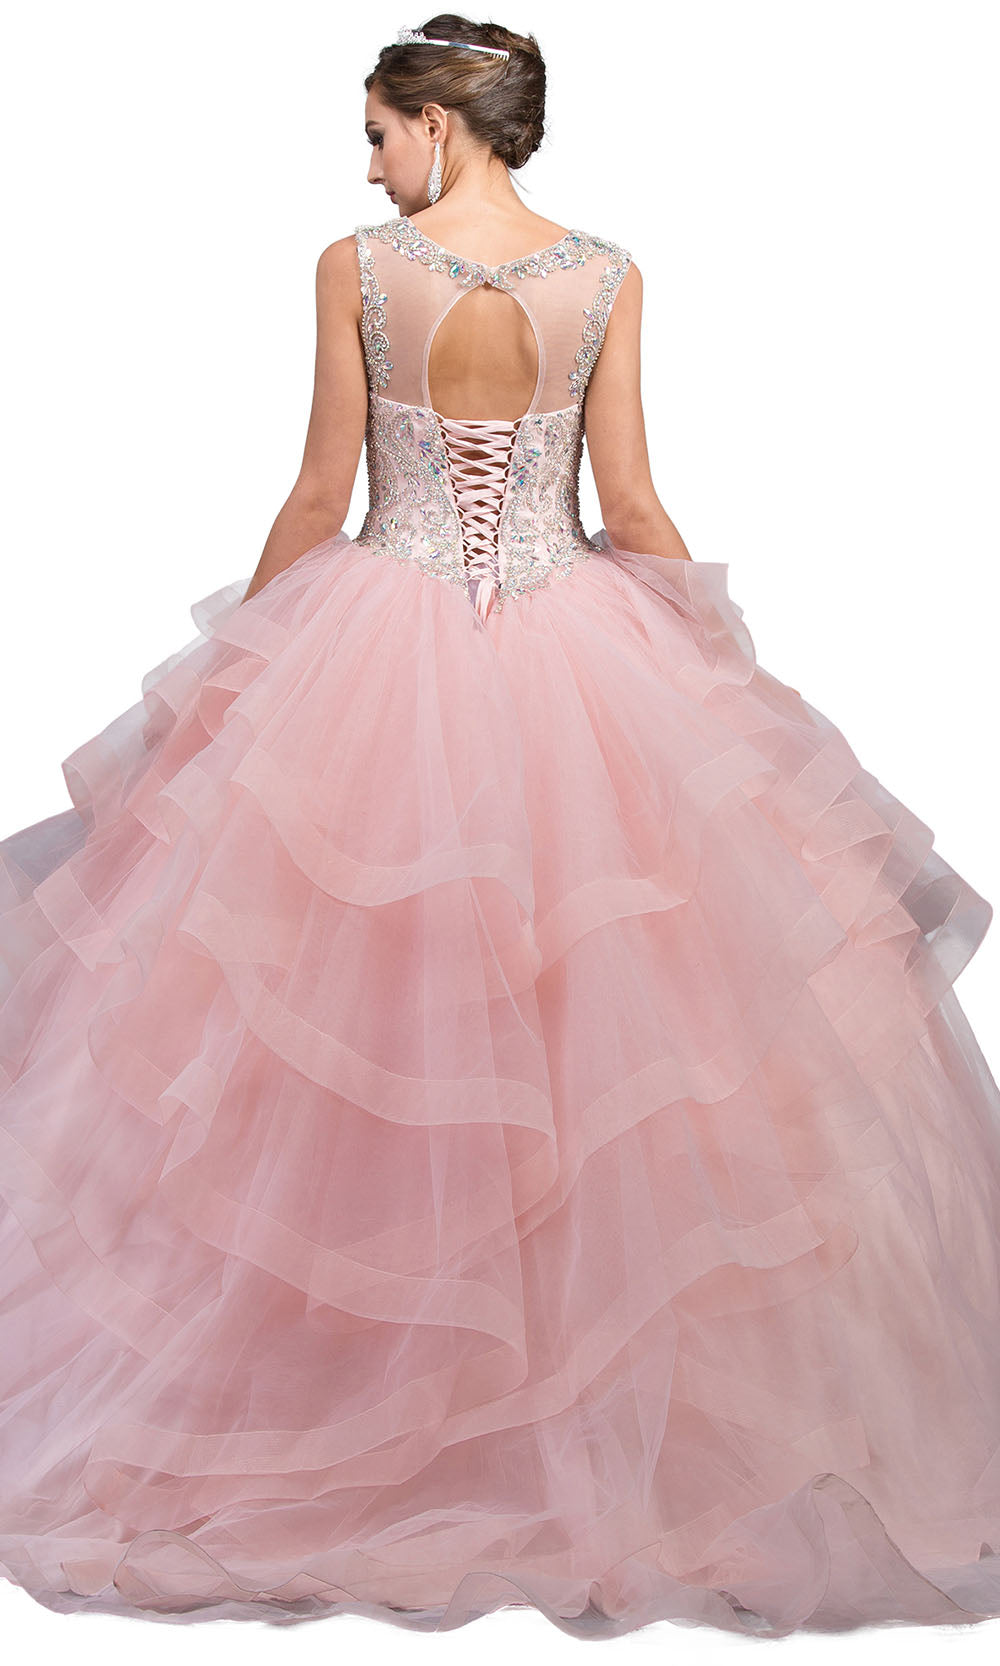 Dancing Queen - 1214 Jeweled Illusion Tiered Ballgown In Pink